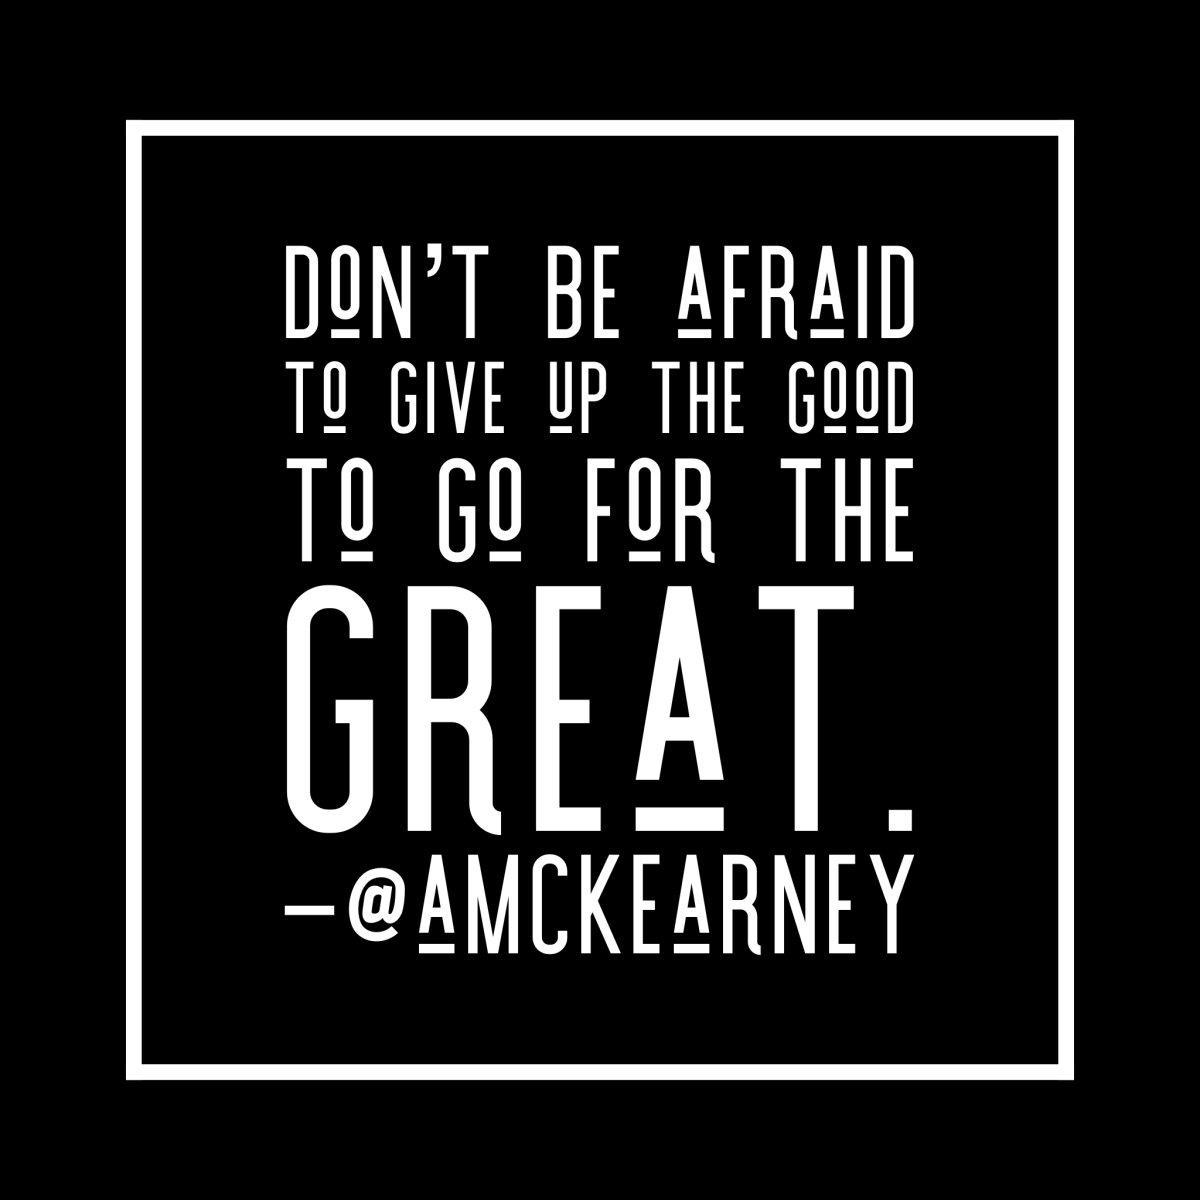 Don’t be afraid to give up the good.